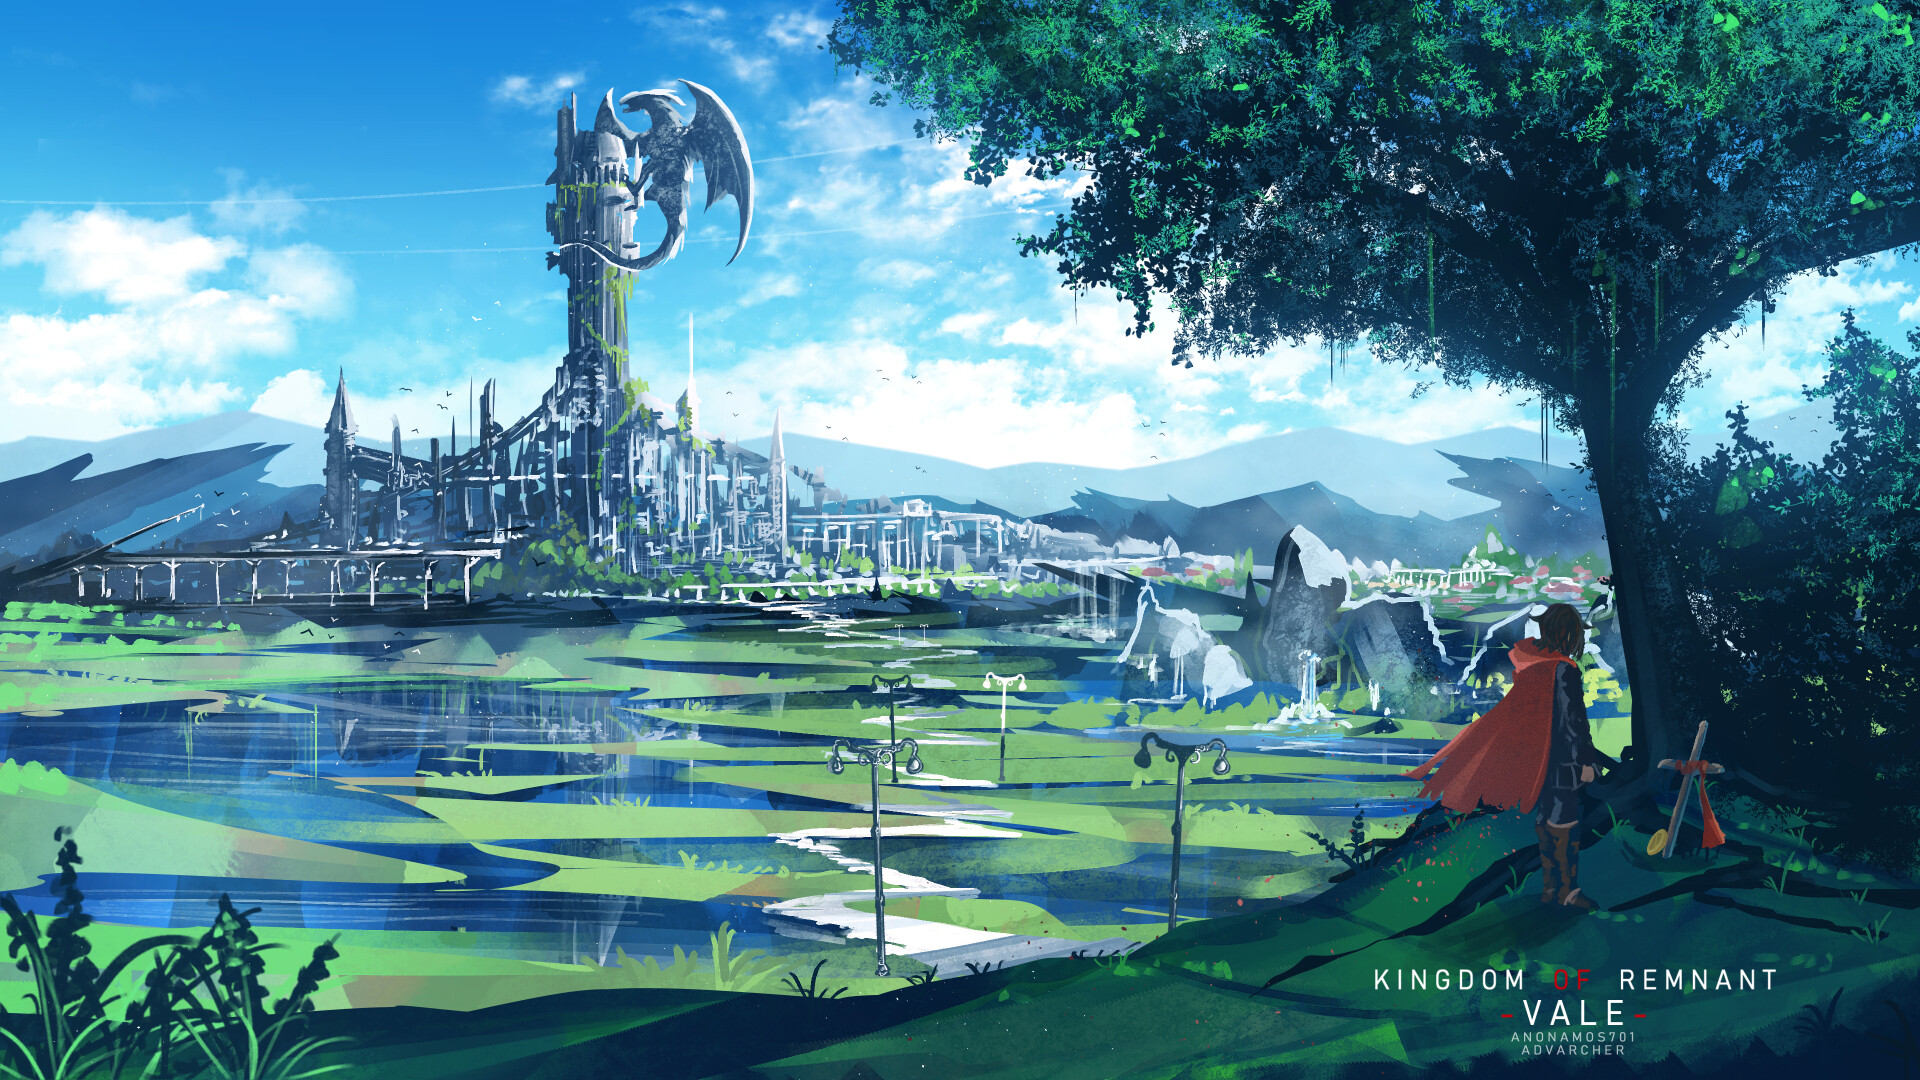 Kingdom of Remnant - Vale, one of the four kingdoms in Roosterteeth's ...